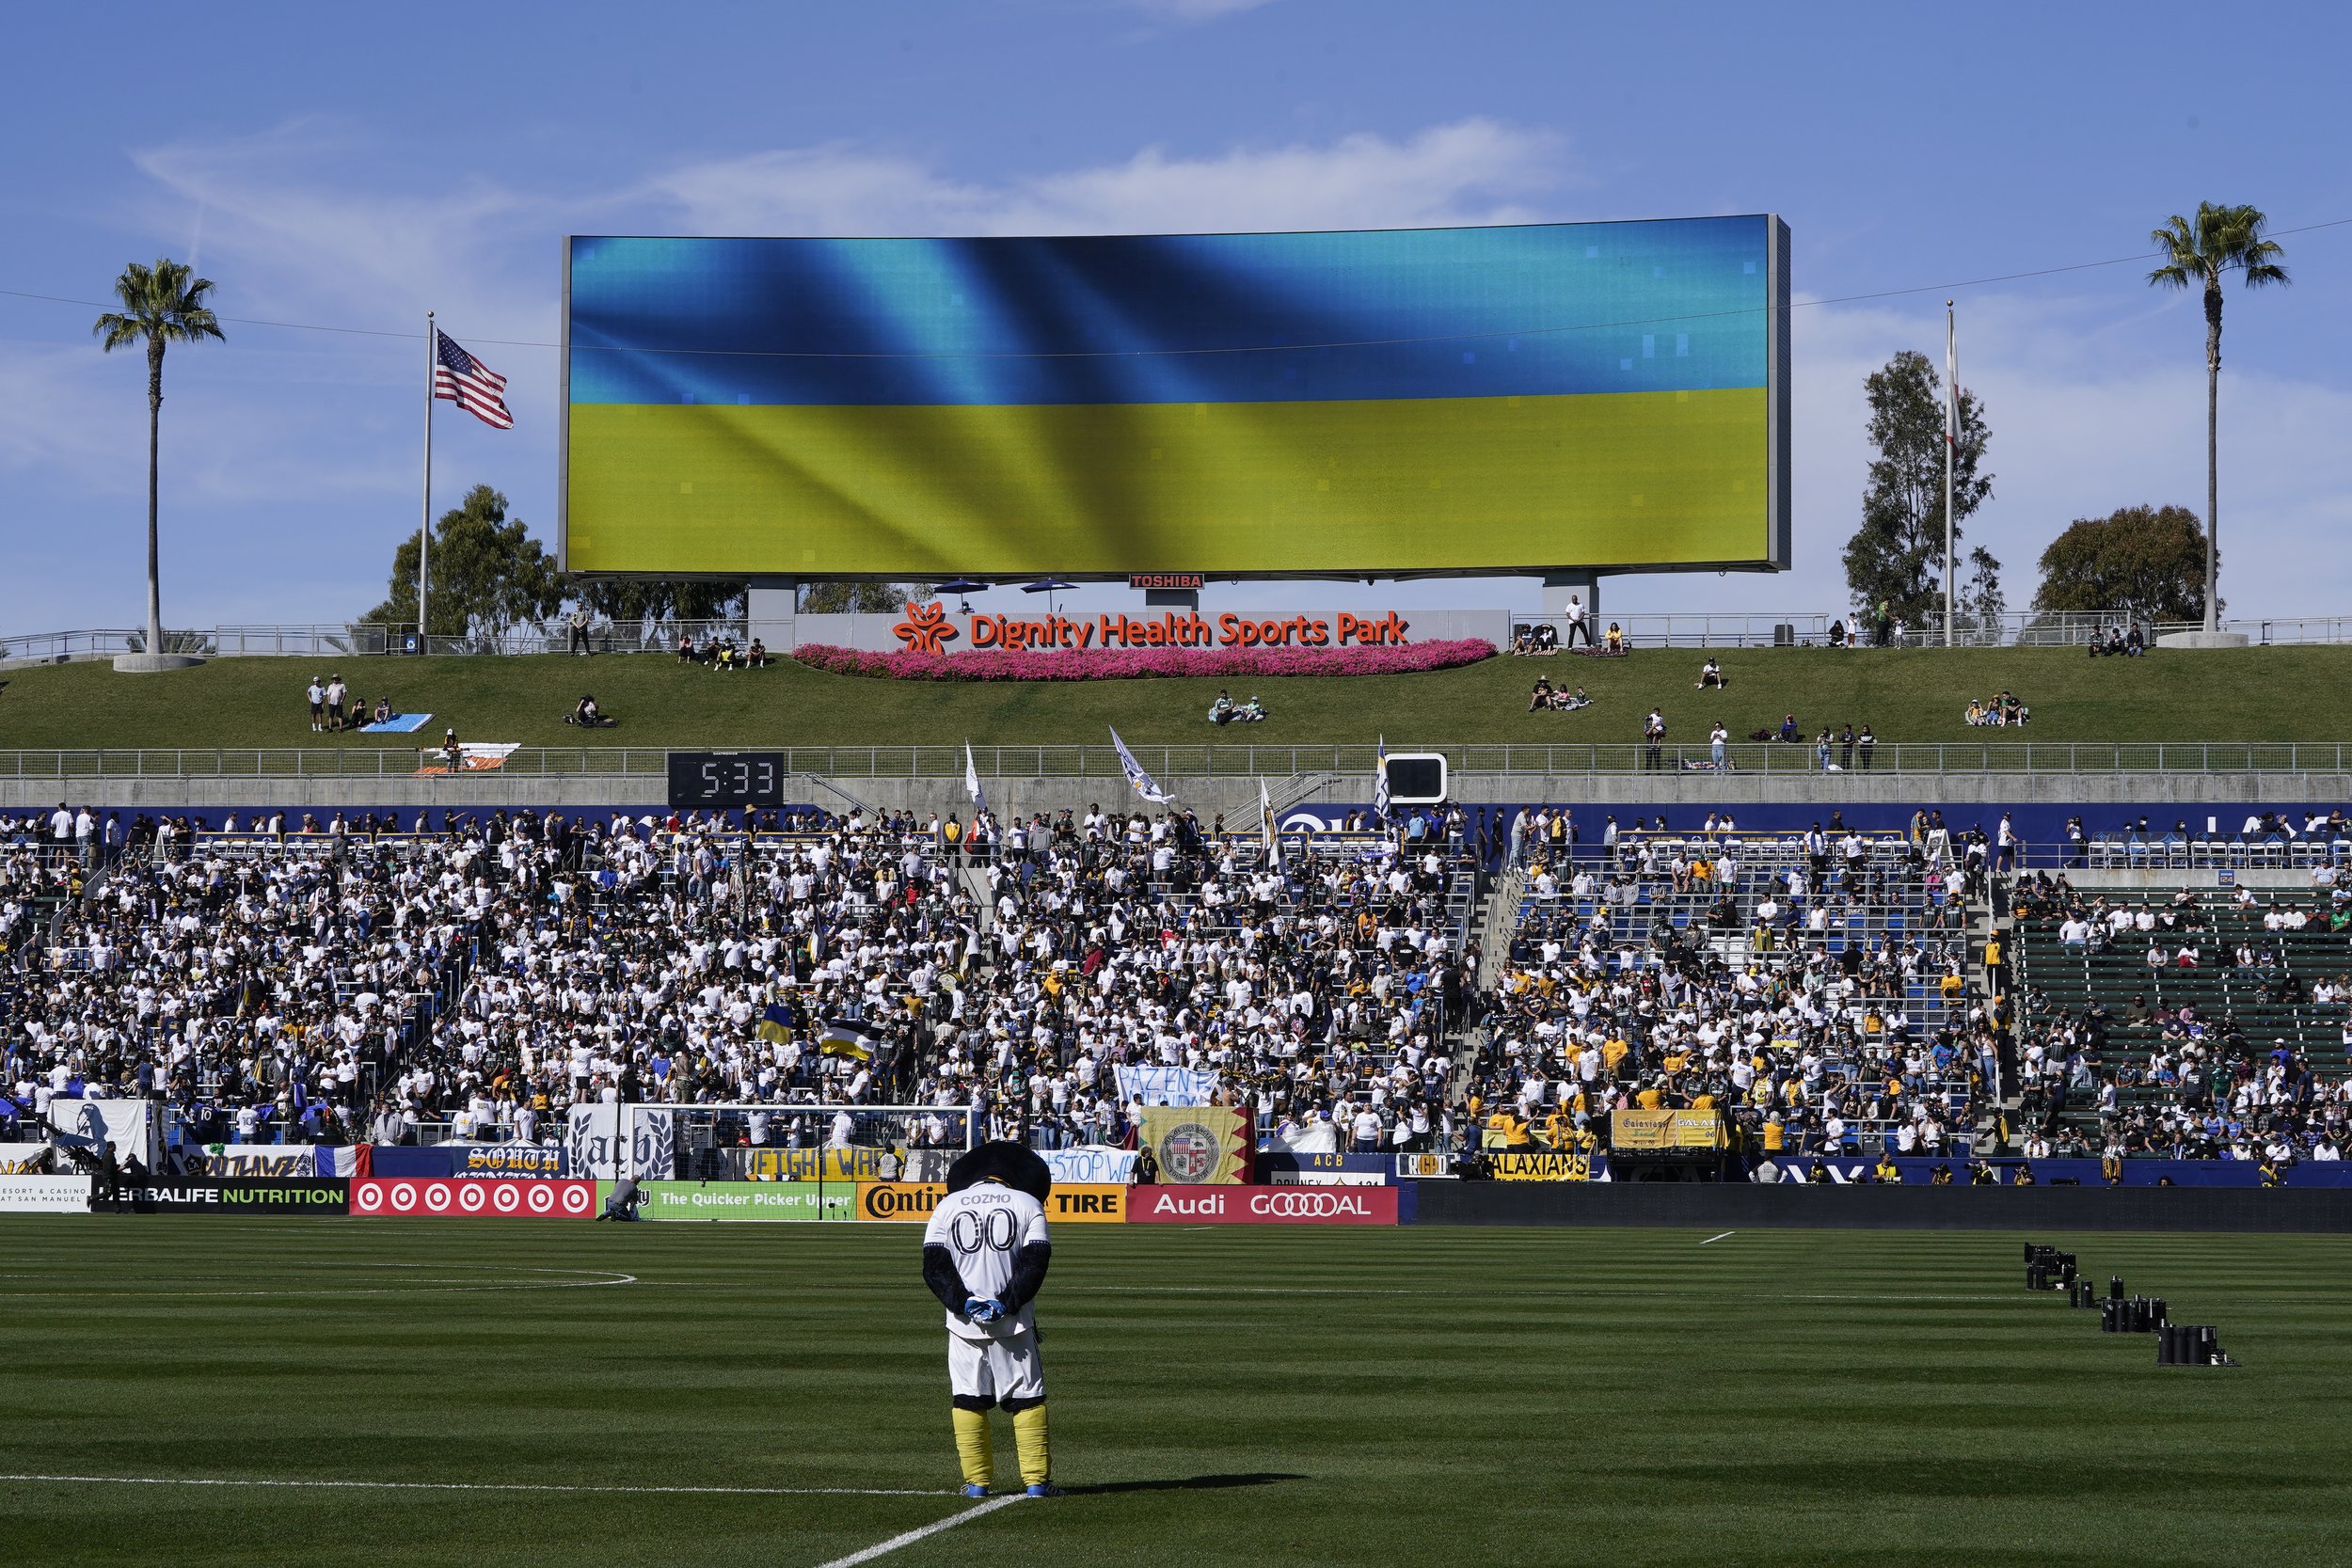  Soccer fans observe a moment of silence in support of Ukraine before an MLS soccer match between the Los Angeles Galaxy and the New York City FC Sunday, Feb. 27, 2022, in Carson, Calif. (AP Photo/Jae C. Hong) 